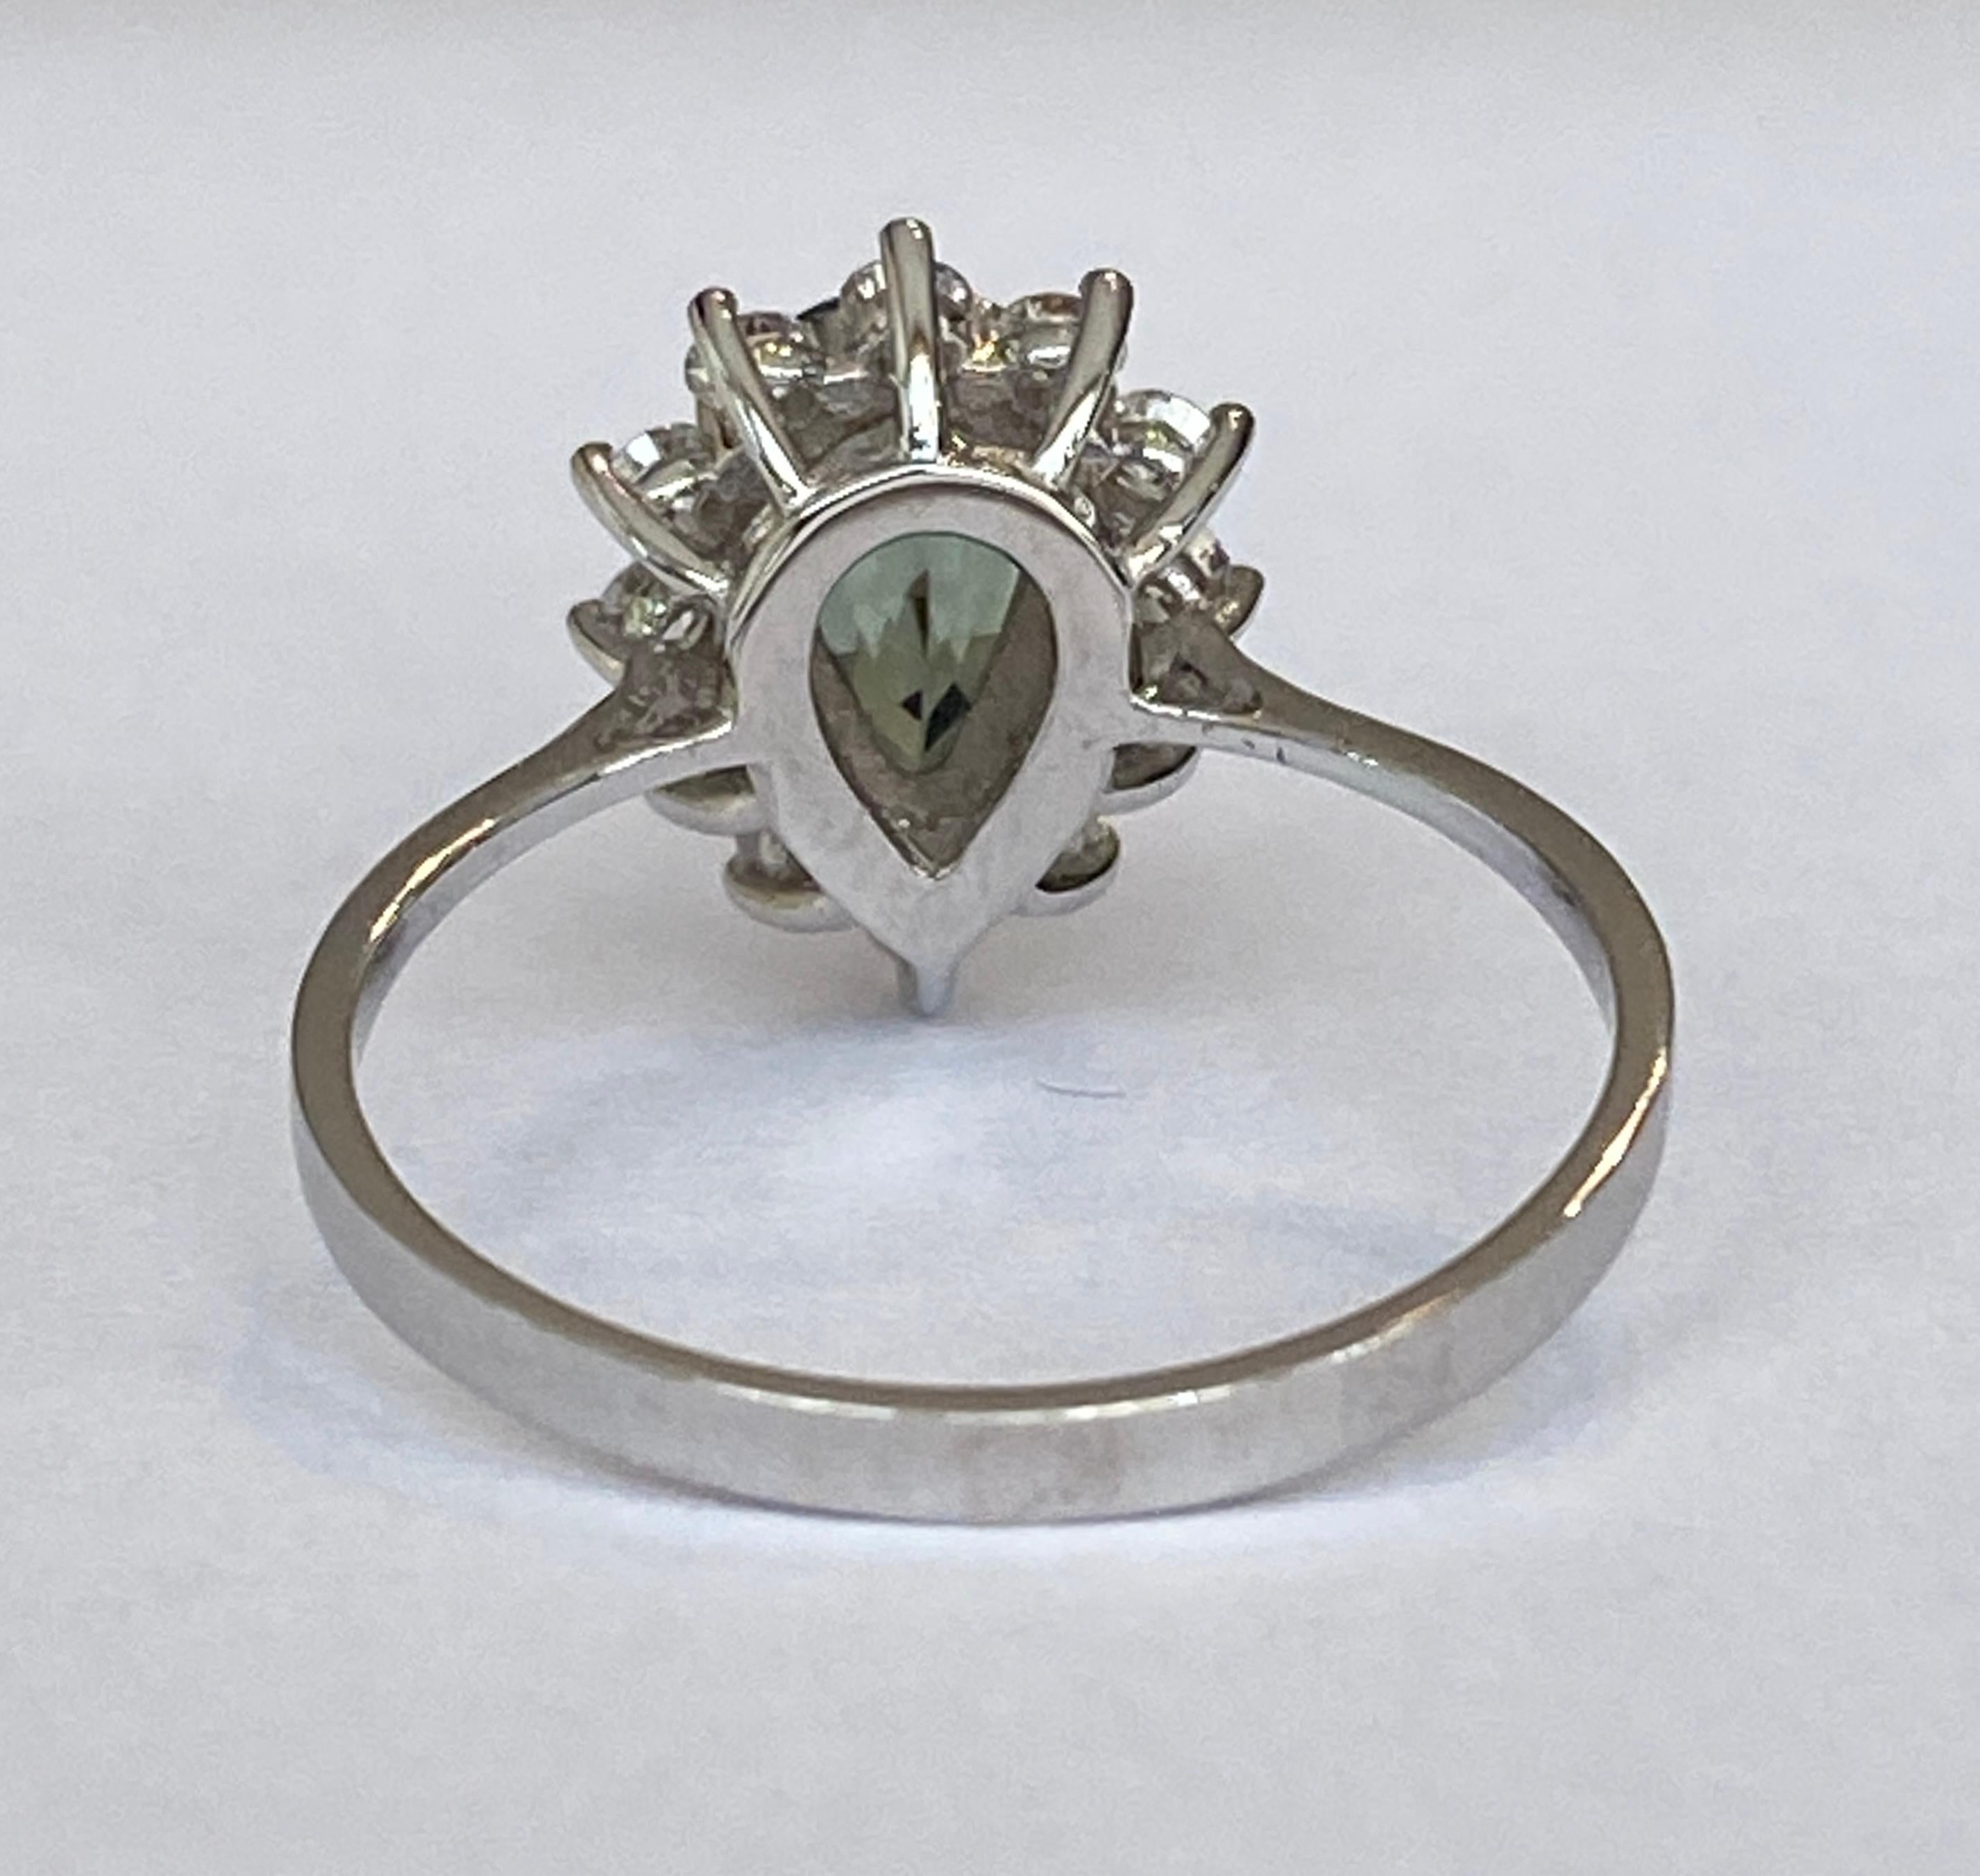 18 Carat White Gold 1.53 Carat Green Sapphire Diamond Cocktail Ring For Sale 2